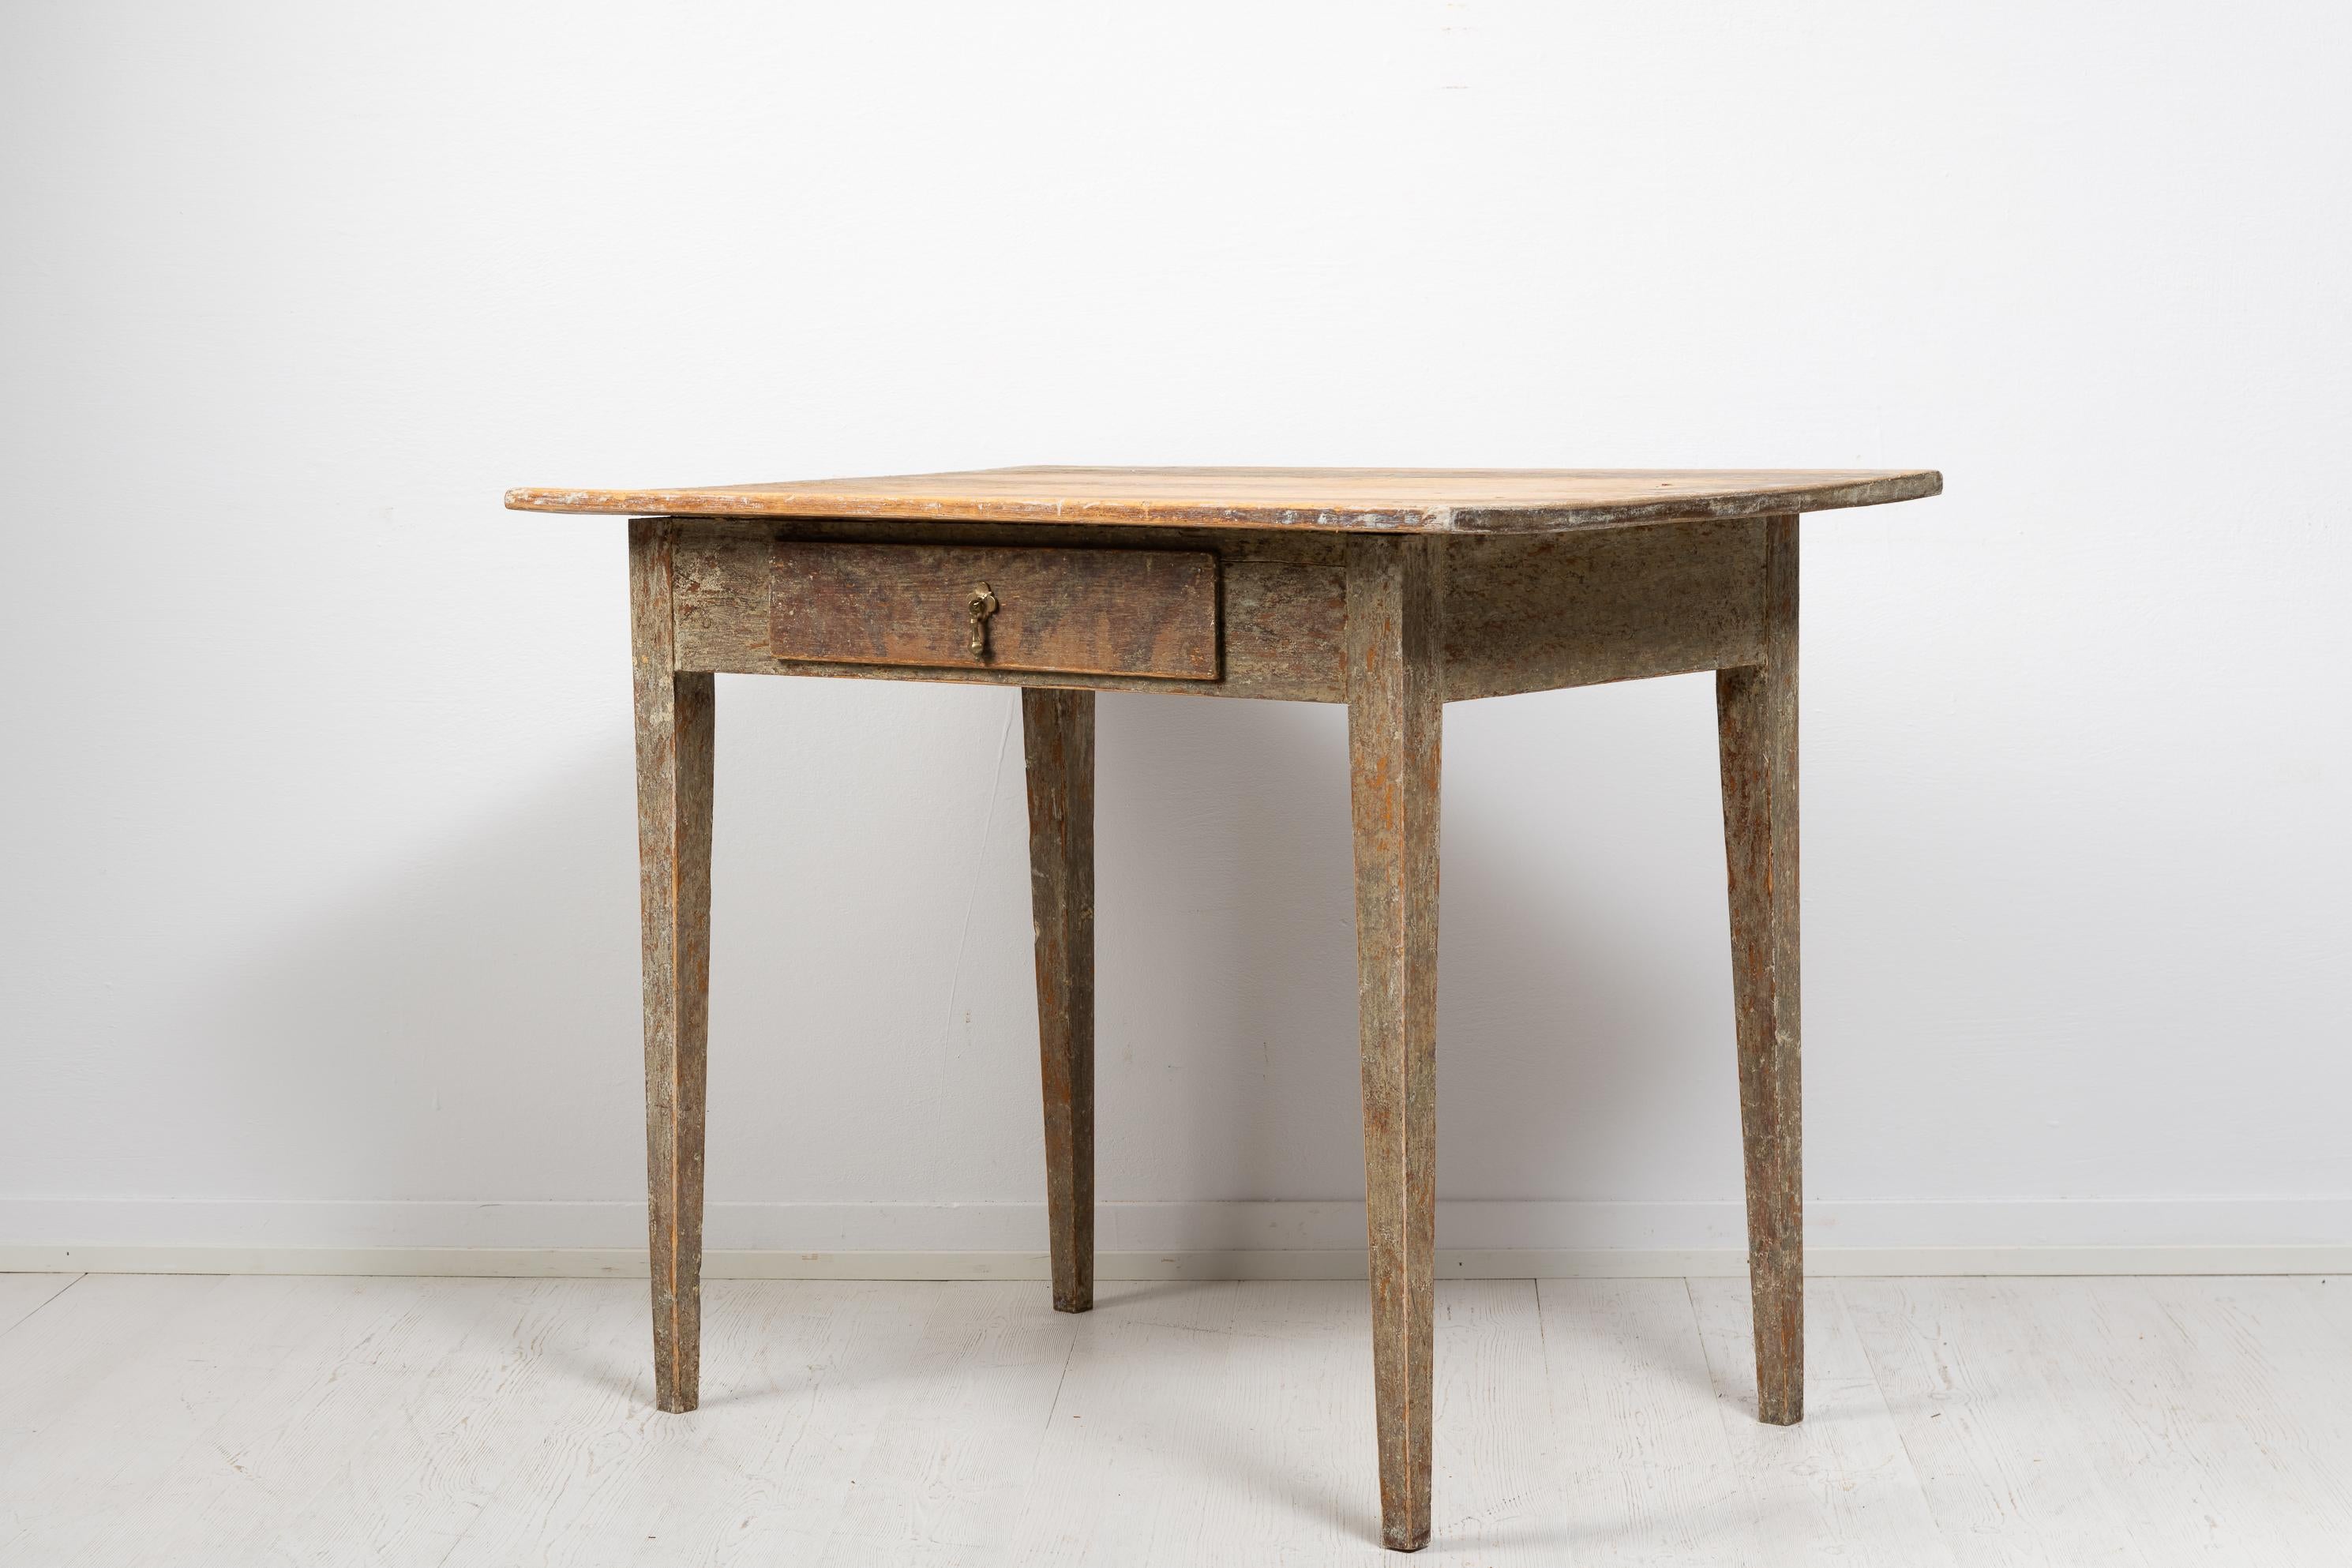 Hand-Crafted Early 19th Century Swedish Gustavian Style Desk